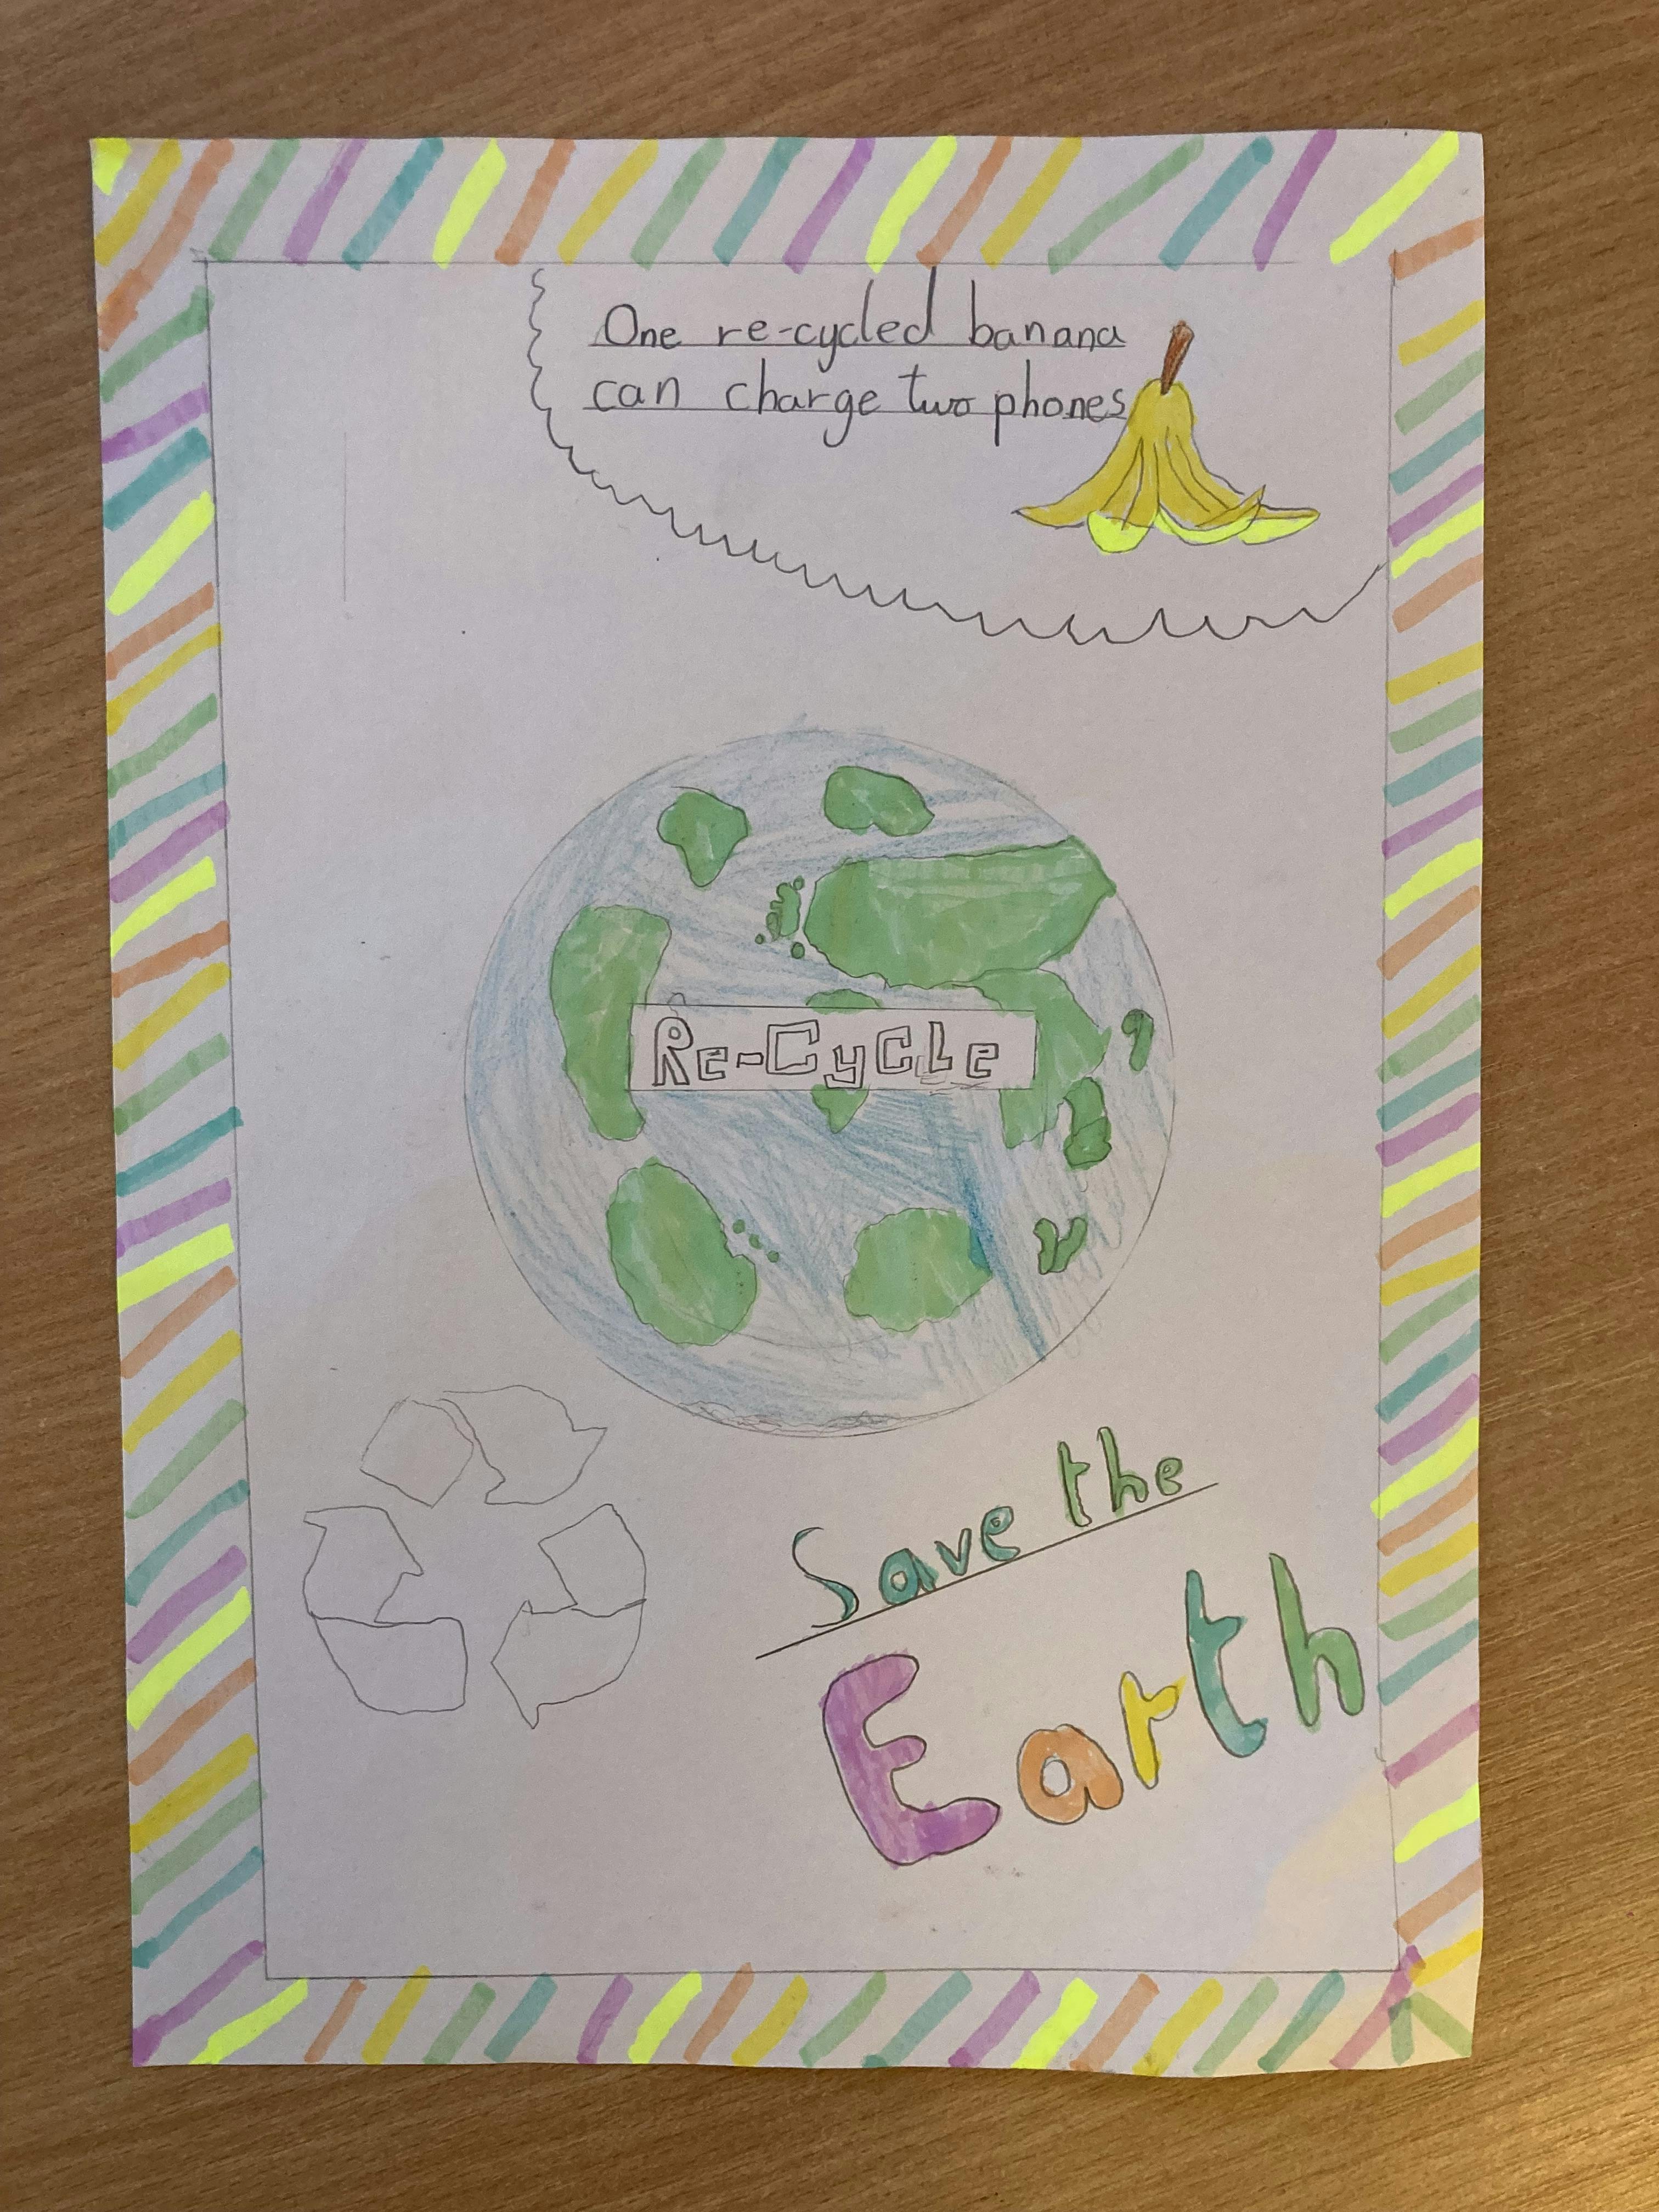 An example of a poster about recycling drawn in crayon by a child.